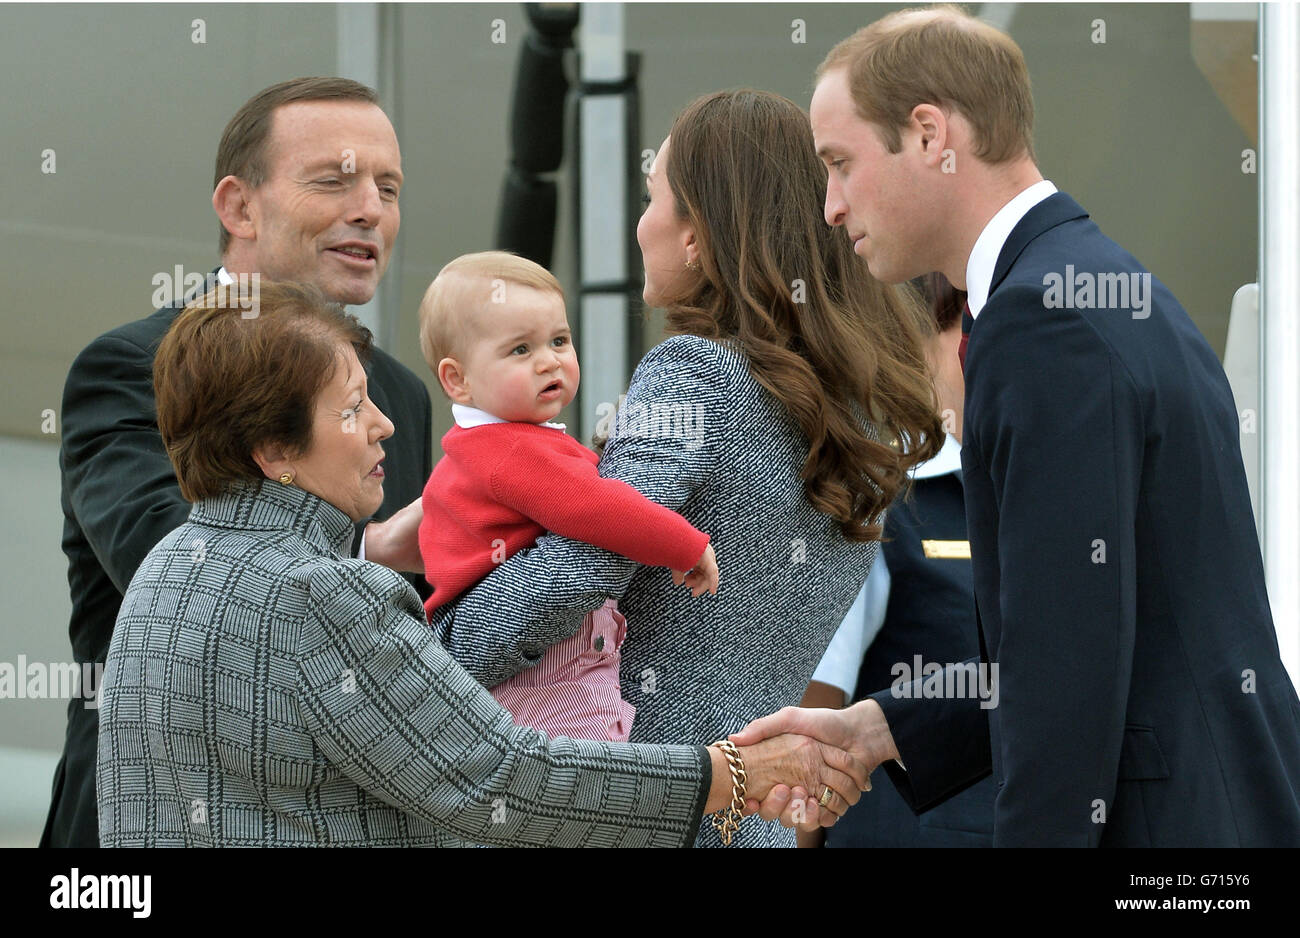 Australian Prime Minster Tony Abbott looks-on as the Duke and Duchess of Cambridge and Prince George depart Canberra on the Royal Australian Air Force aircraft to transfer to an international commercial flight to London during the eighteenth day of their official tour to New Zealand and Australia. Stock Photo